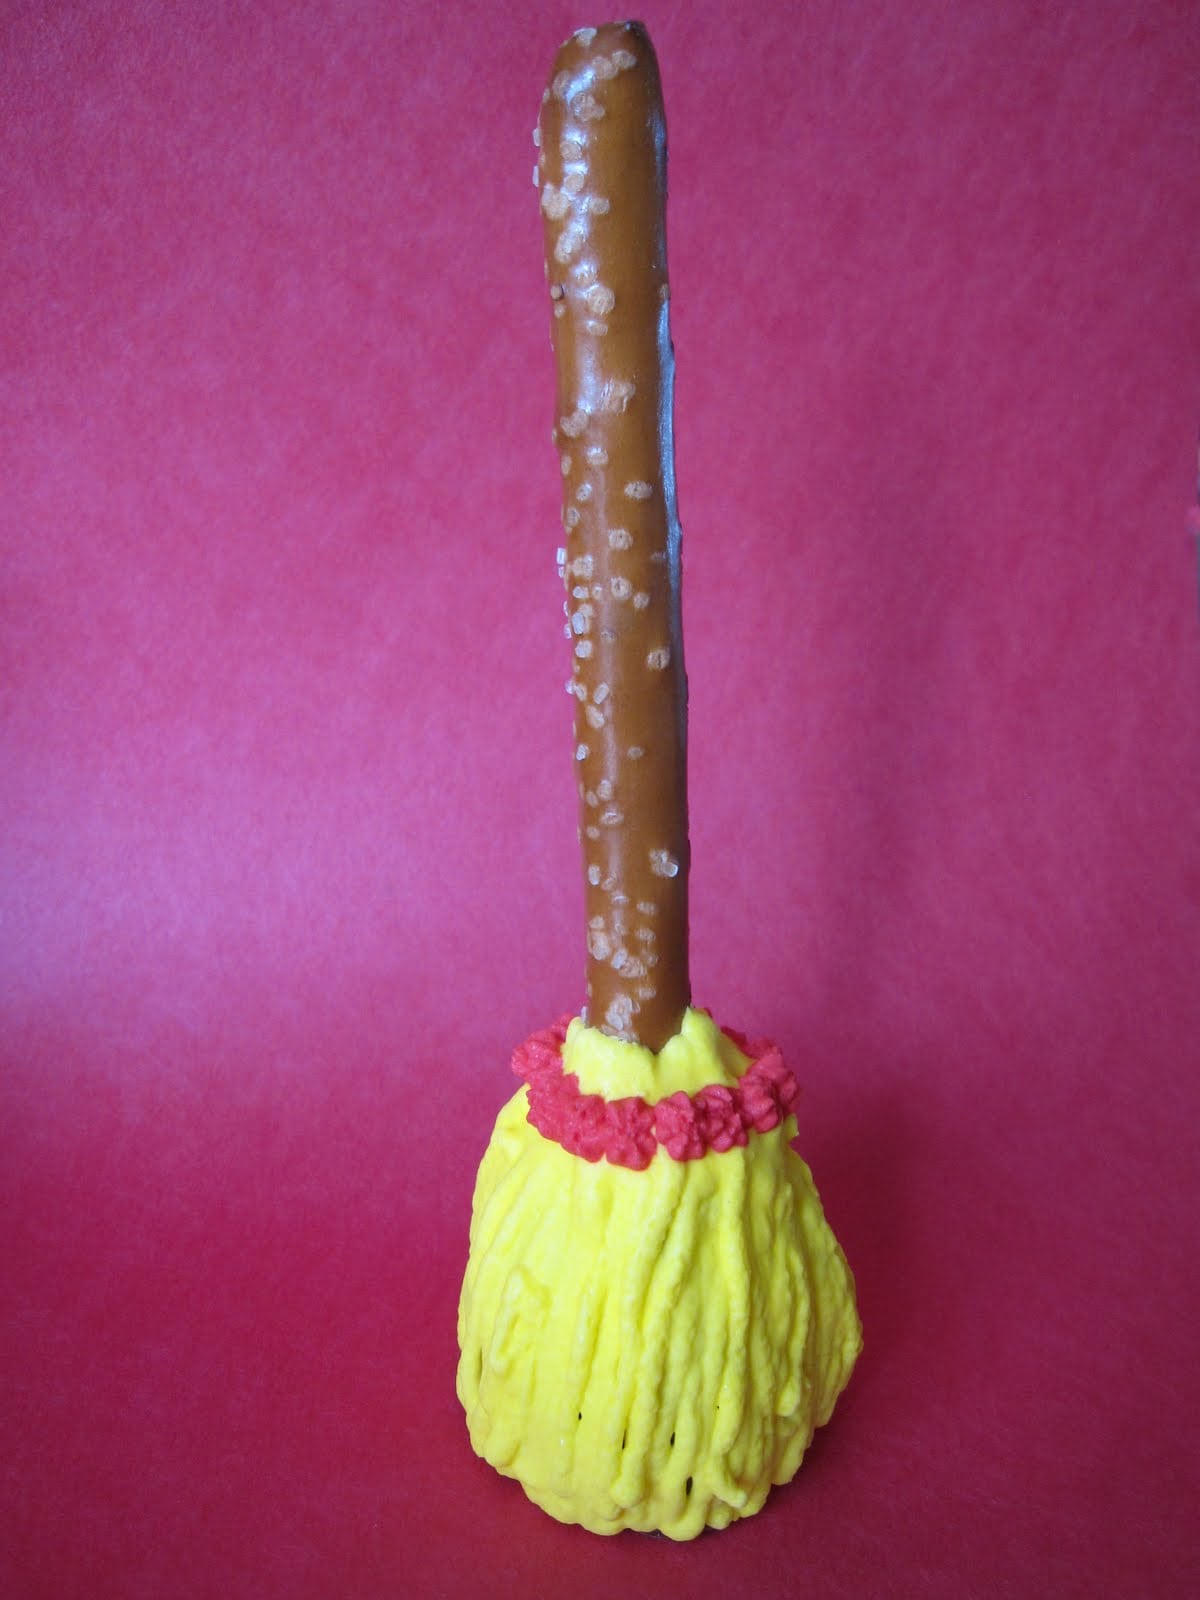 Oreo Truffle Witch's Broom with yellow icing bristles